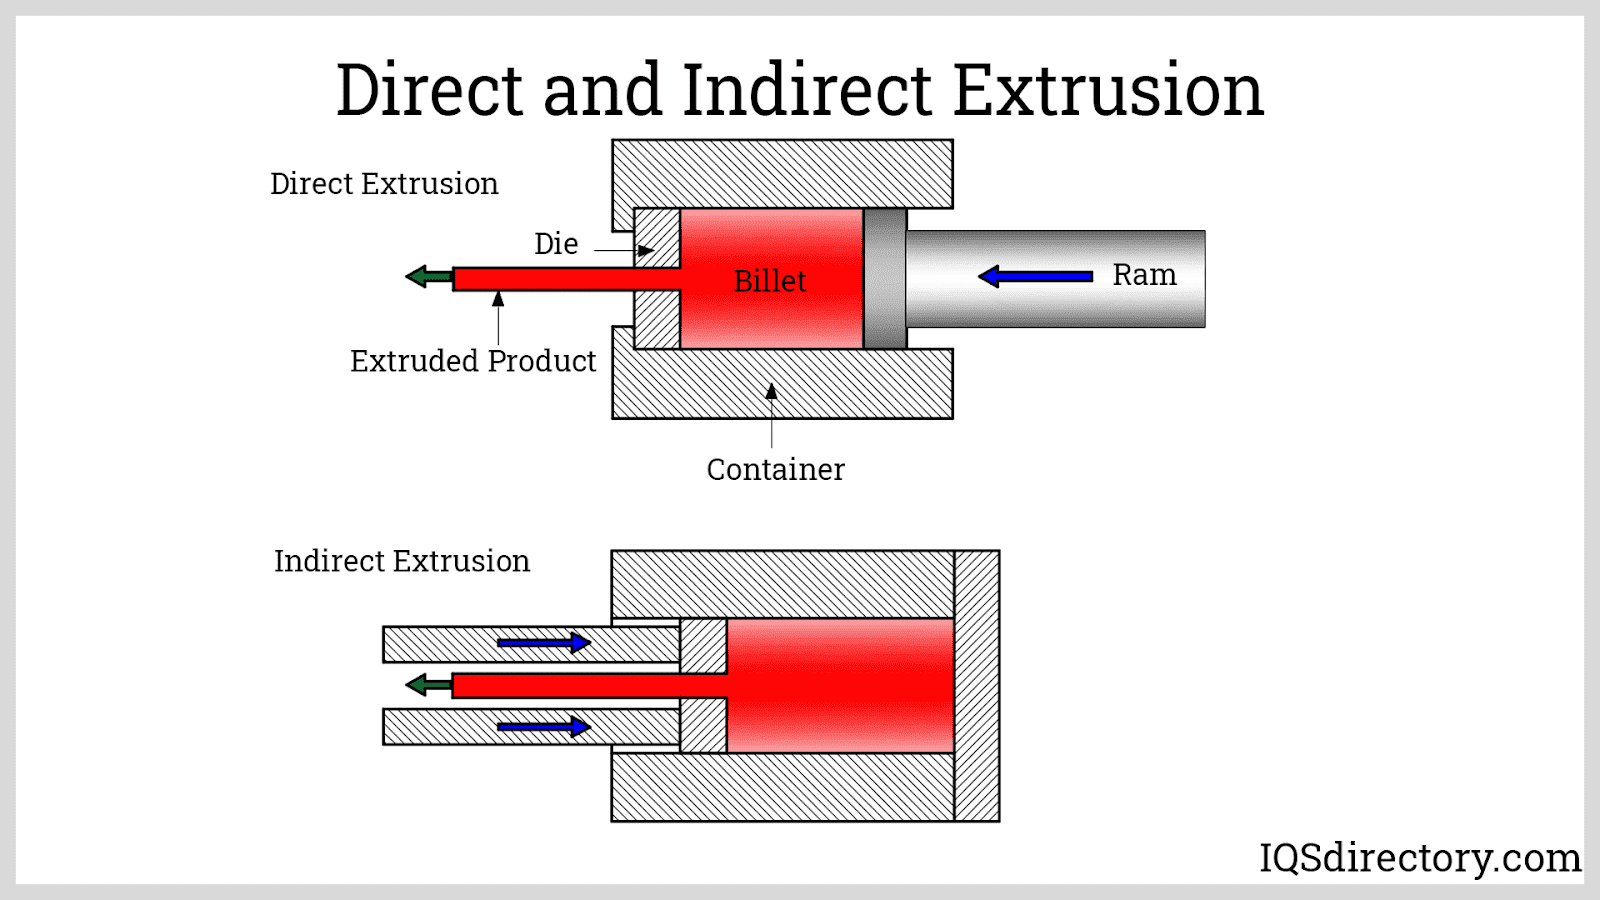 Direct and Indirect Extrusion